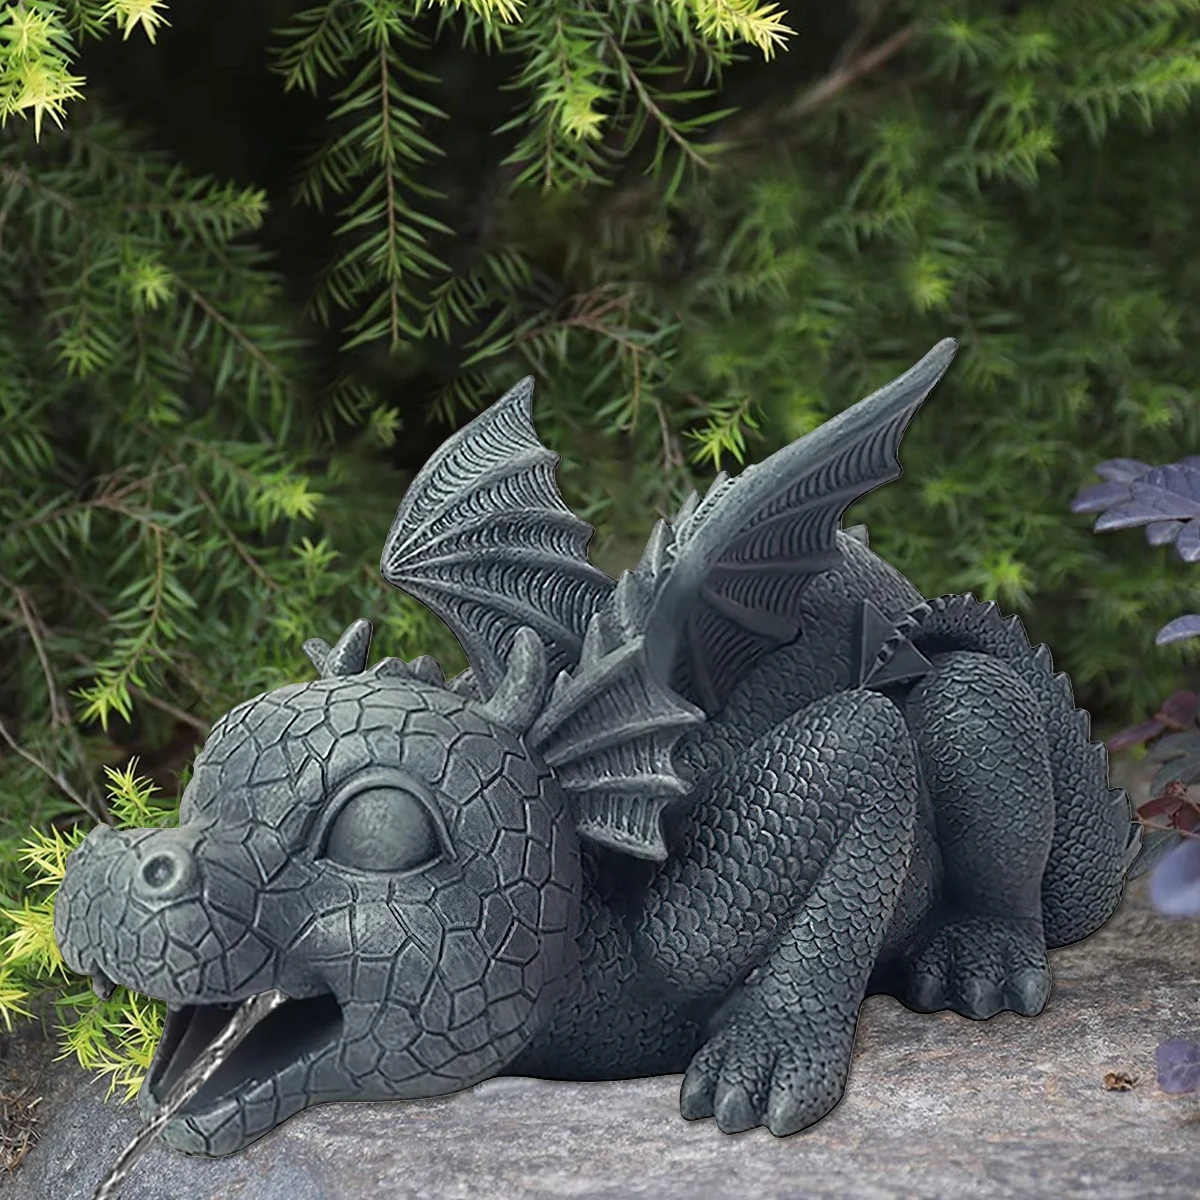 L Fountain Dragon Statue Resin Spouting Water Dragon Sculpture Weather Resistant Realistic Water Spray Dragon Statue Outdoor